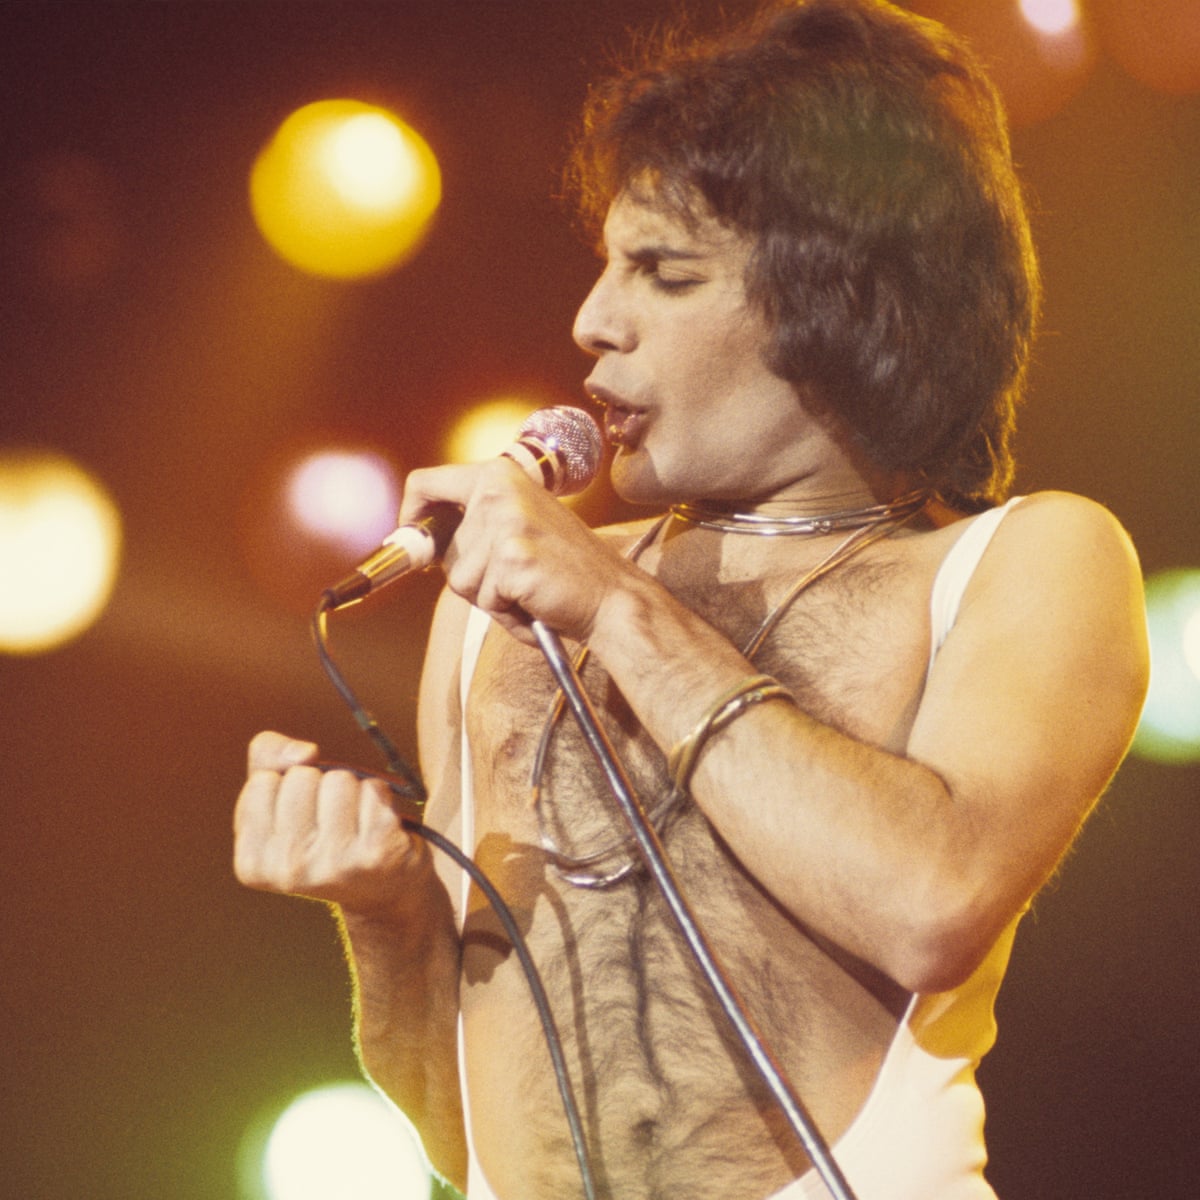 Queen's Bohemian Rhapsody becomes most streamed song from 20th century, Music streaming